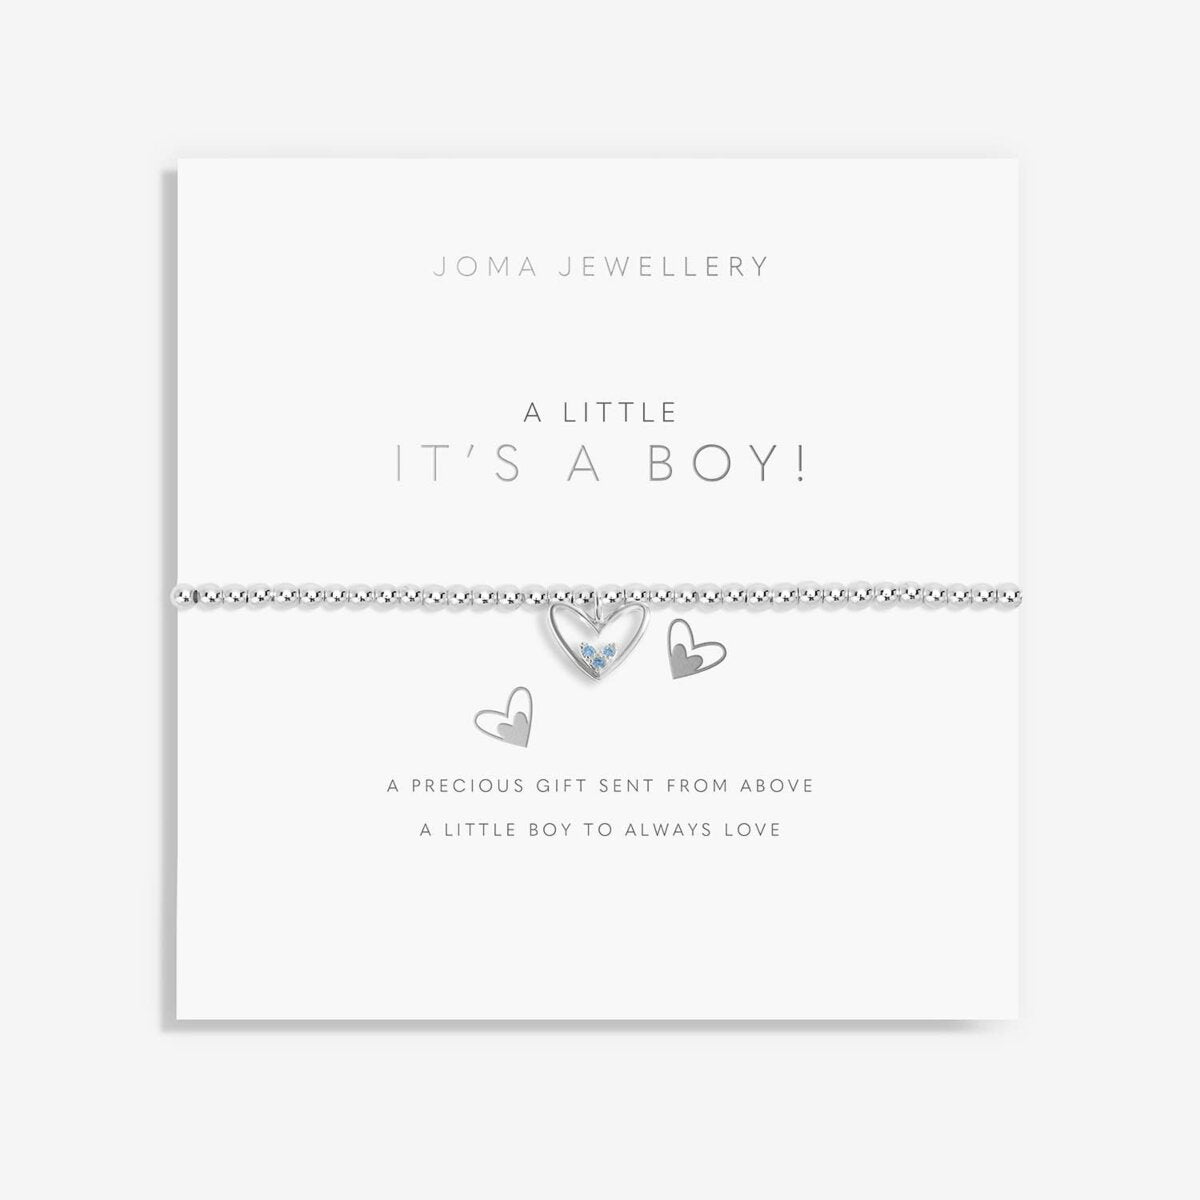 Celebrate the arrival of the new baby boy with our It's a Boy! Bracelet. This glittering silver bracelet features a stretch-bead style and a sparkling silver heart-shaped charm, surrounded by blue gemstone